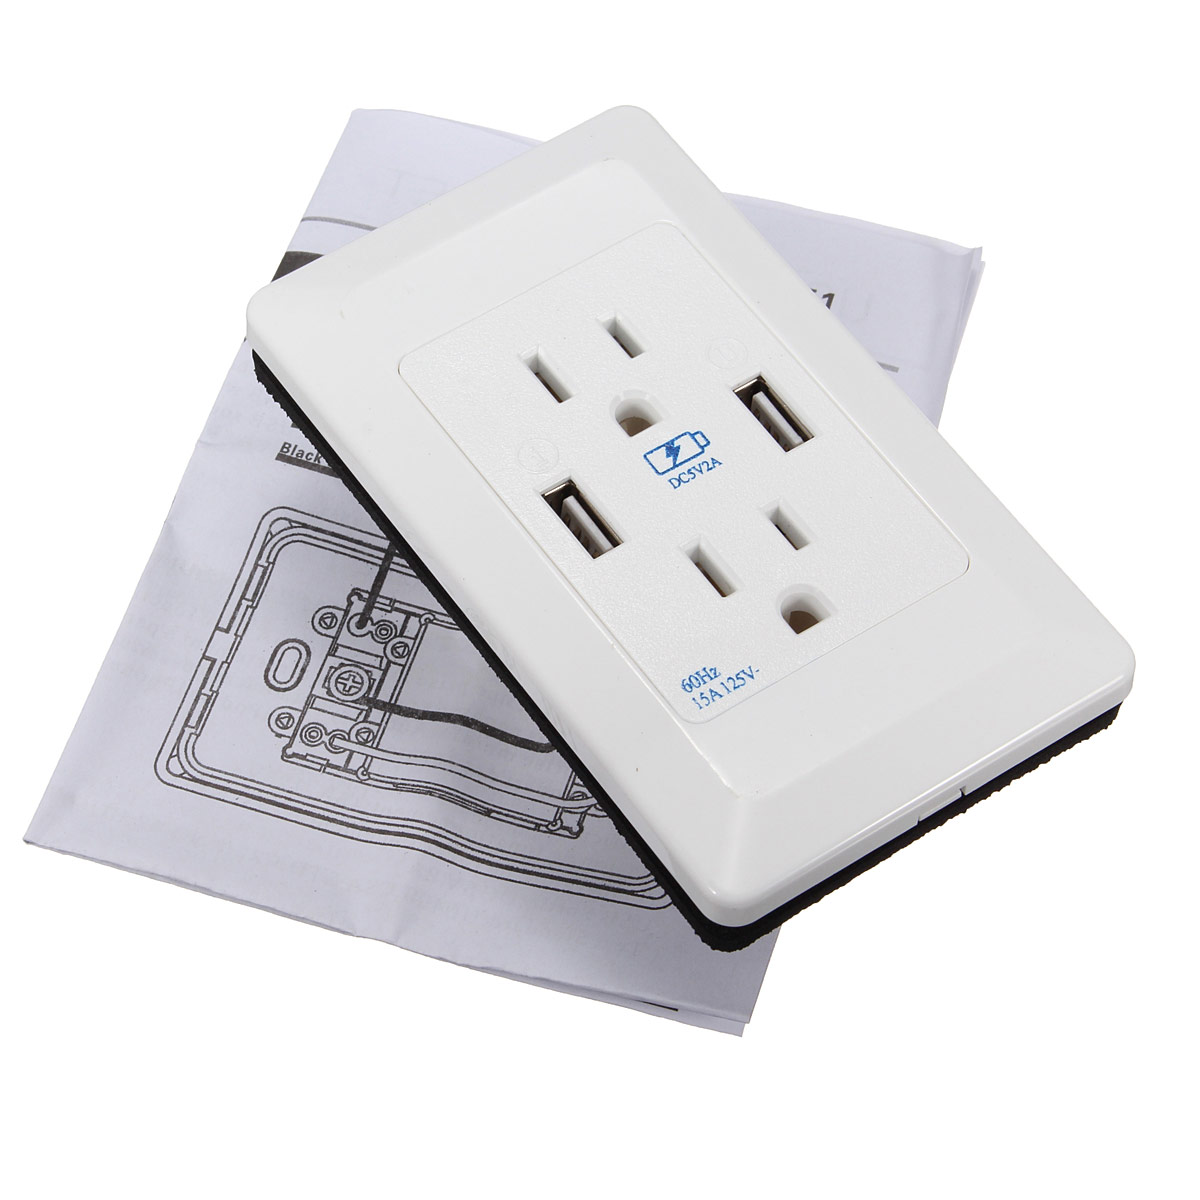 Find AC Wall Socket Power Adapter Receptacle 2 Port USB Charger Panel Outlet Plate for Sale on Gipsybee.com with cryptocurrencies